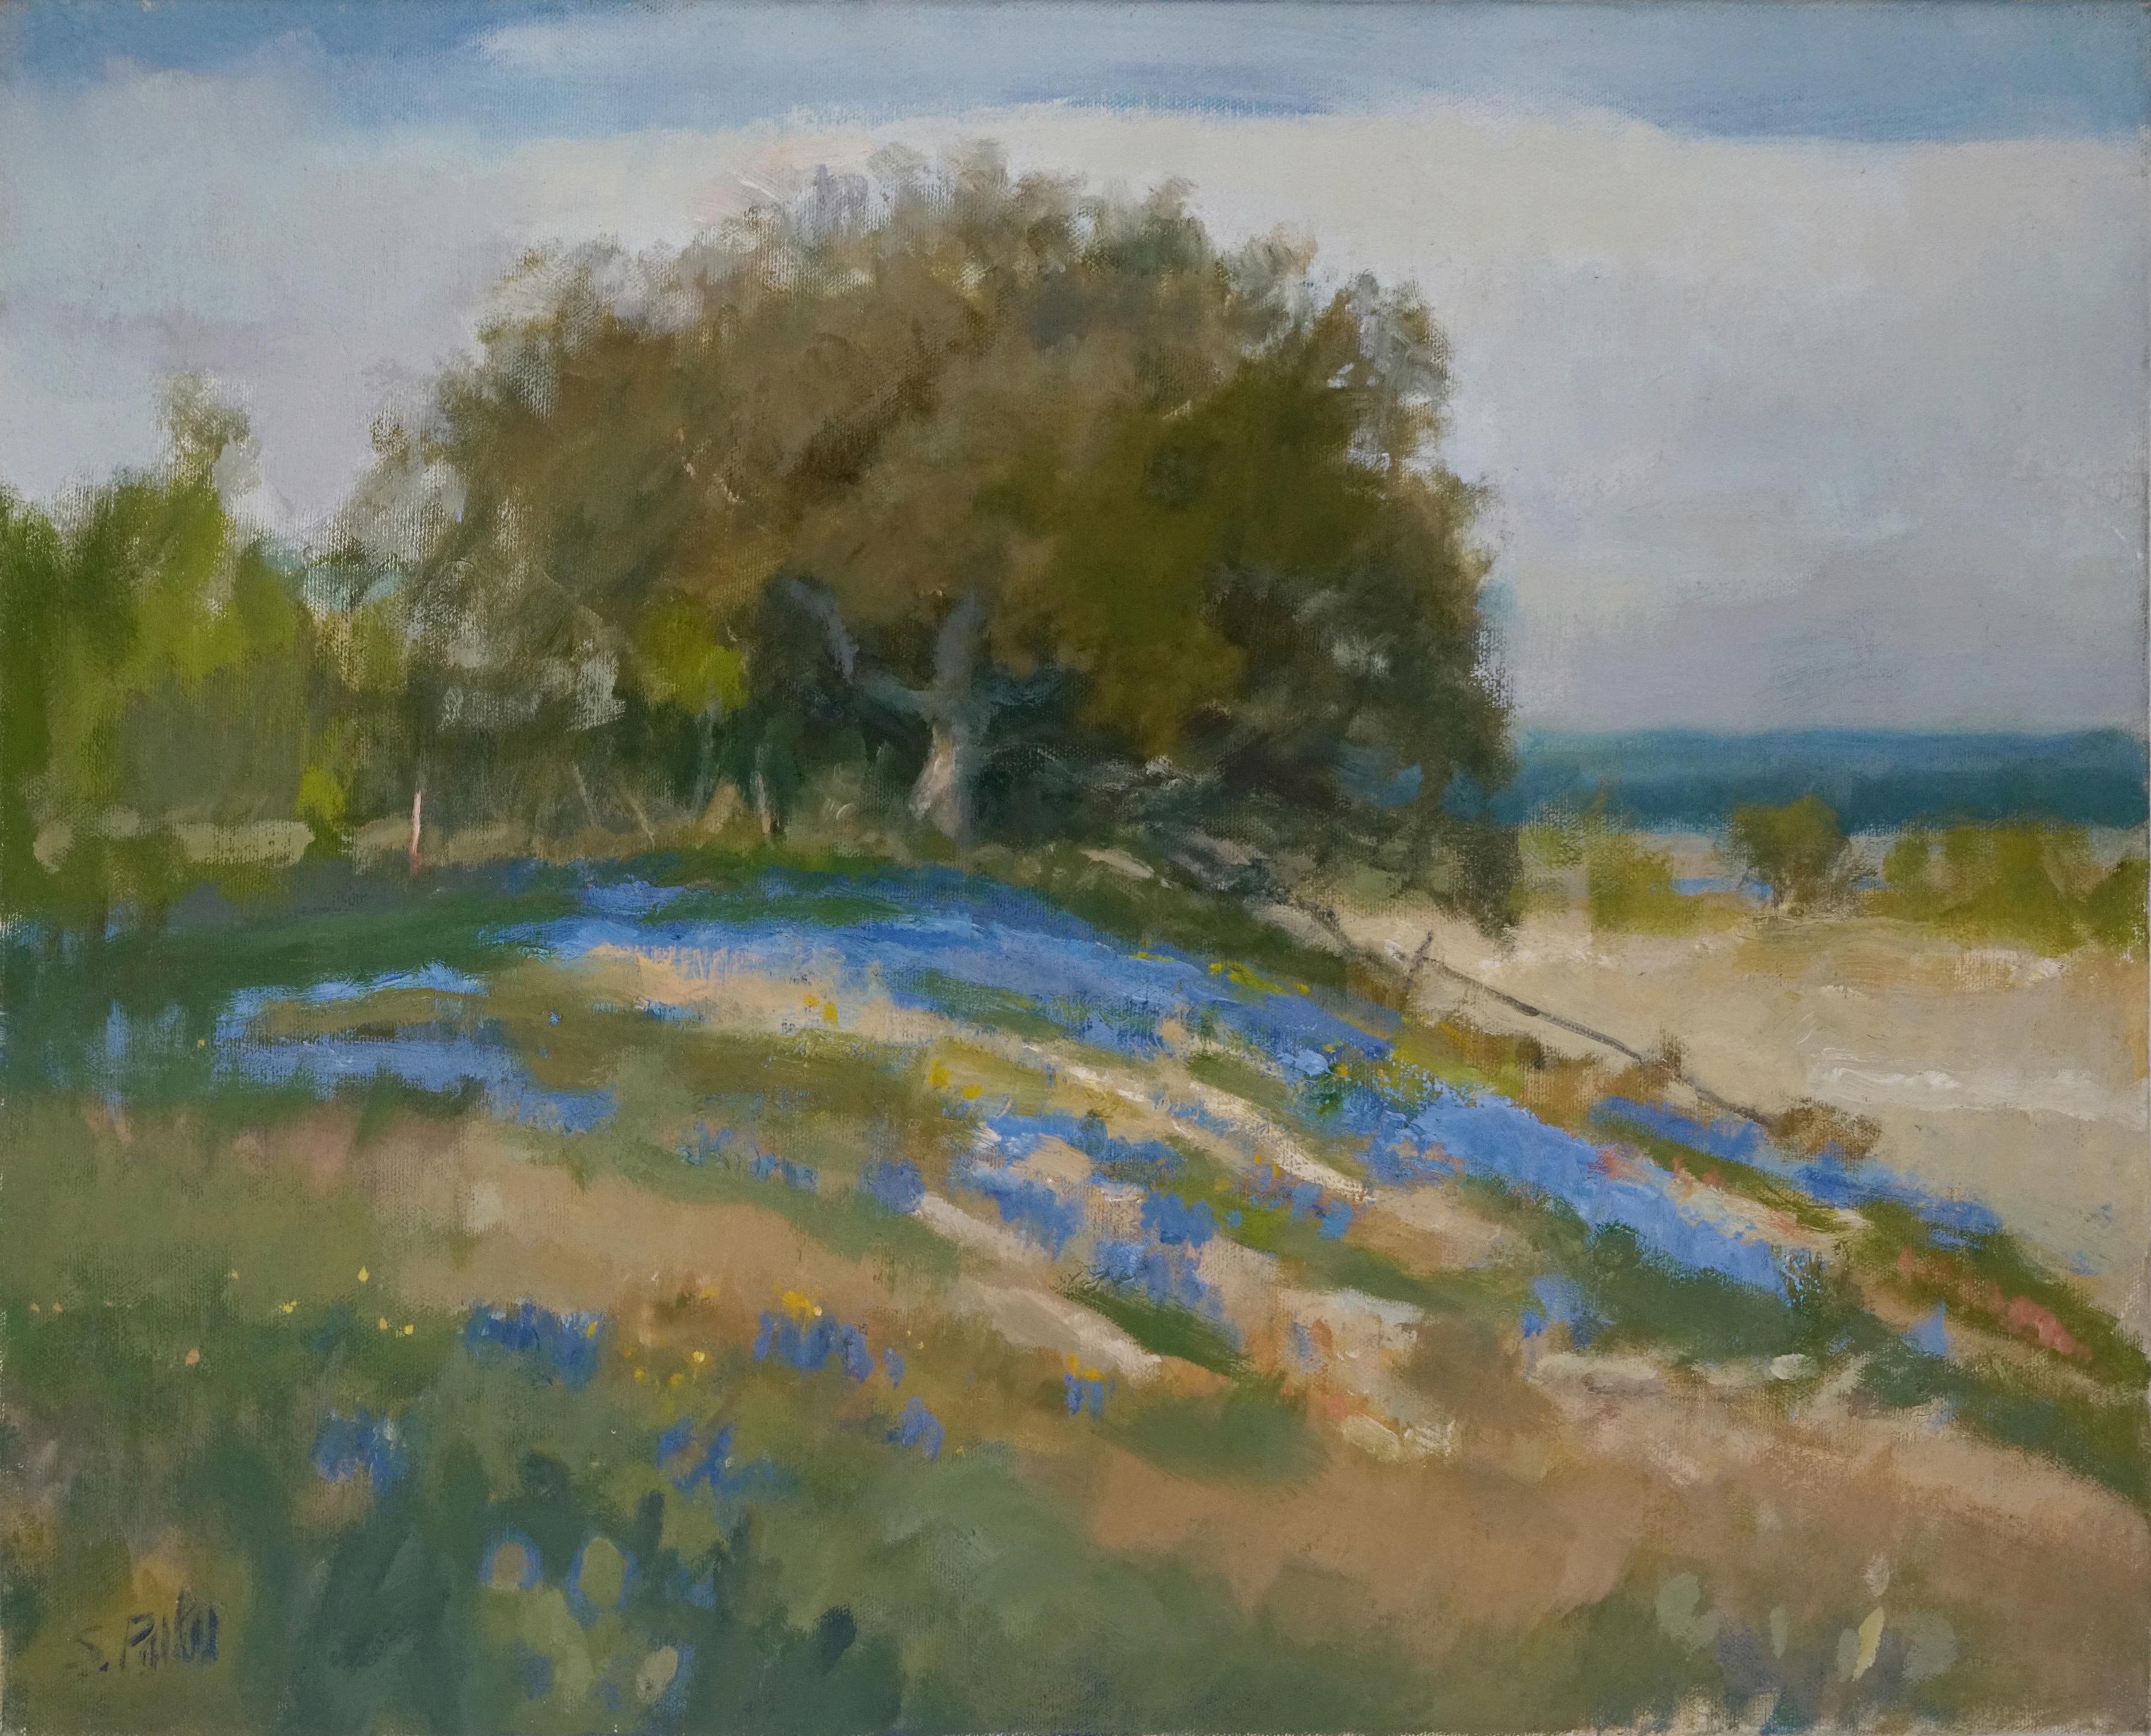 Oaks & Bluebonnets , Oil Paint, Weimar Texas, Impressionism, Texas Hill Country.